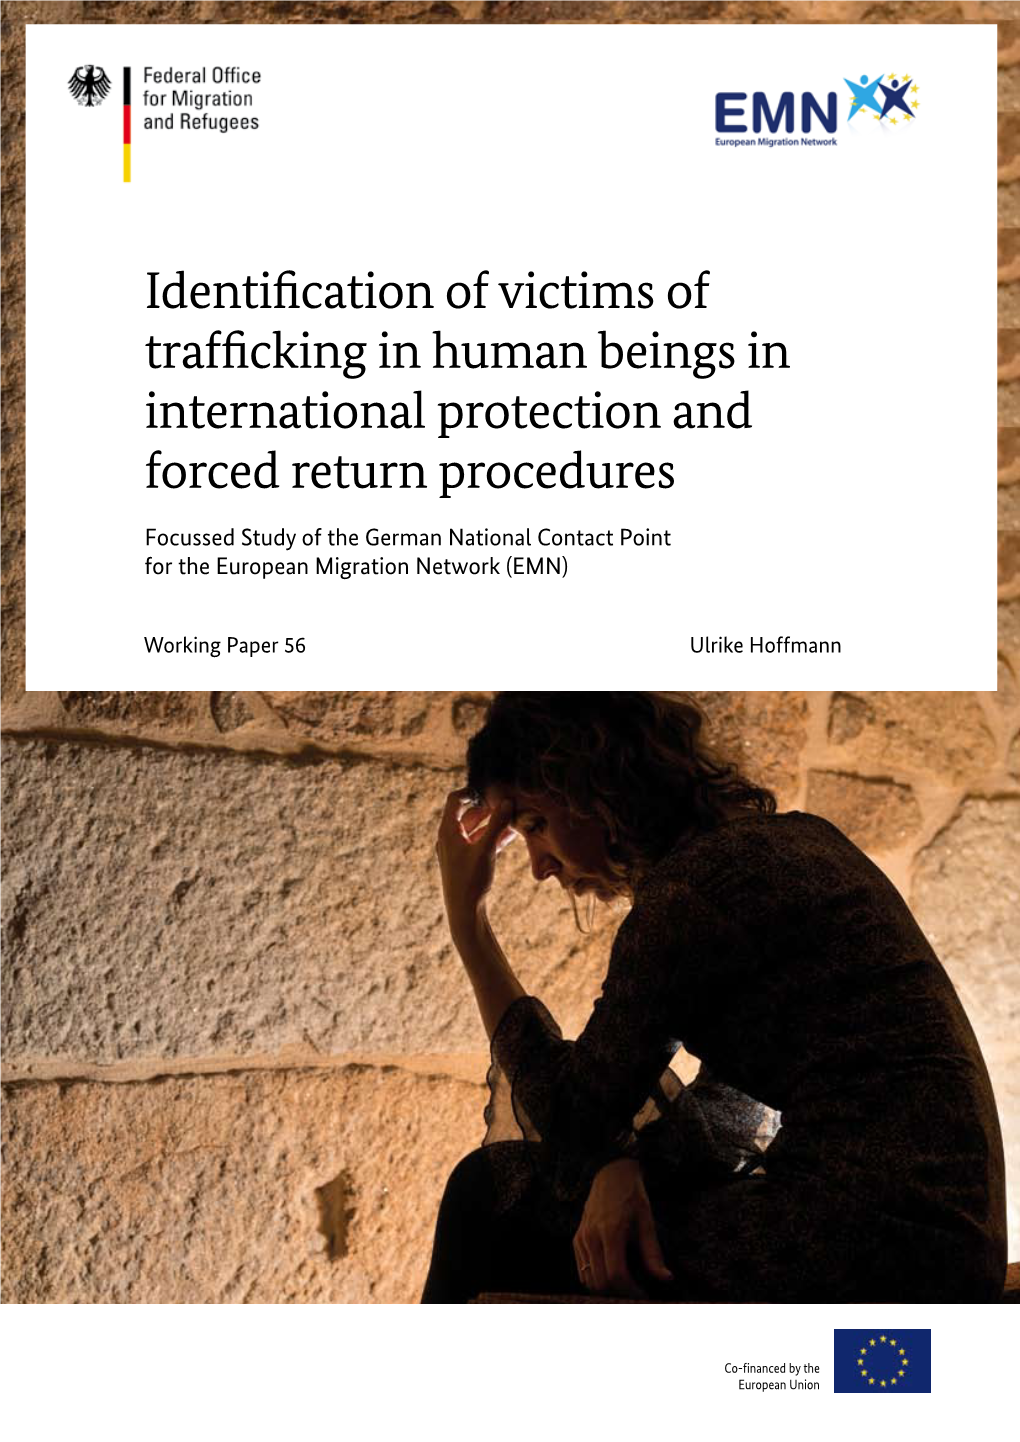 Identification of Victims of Trafficking in Human Beings in International Protection and Forced Return Procedures